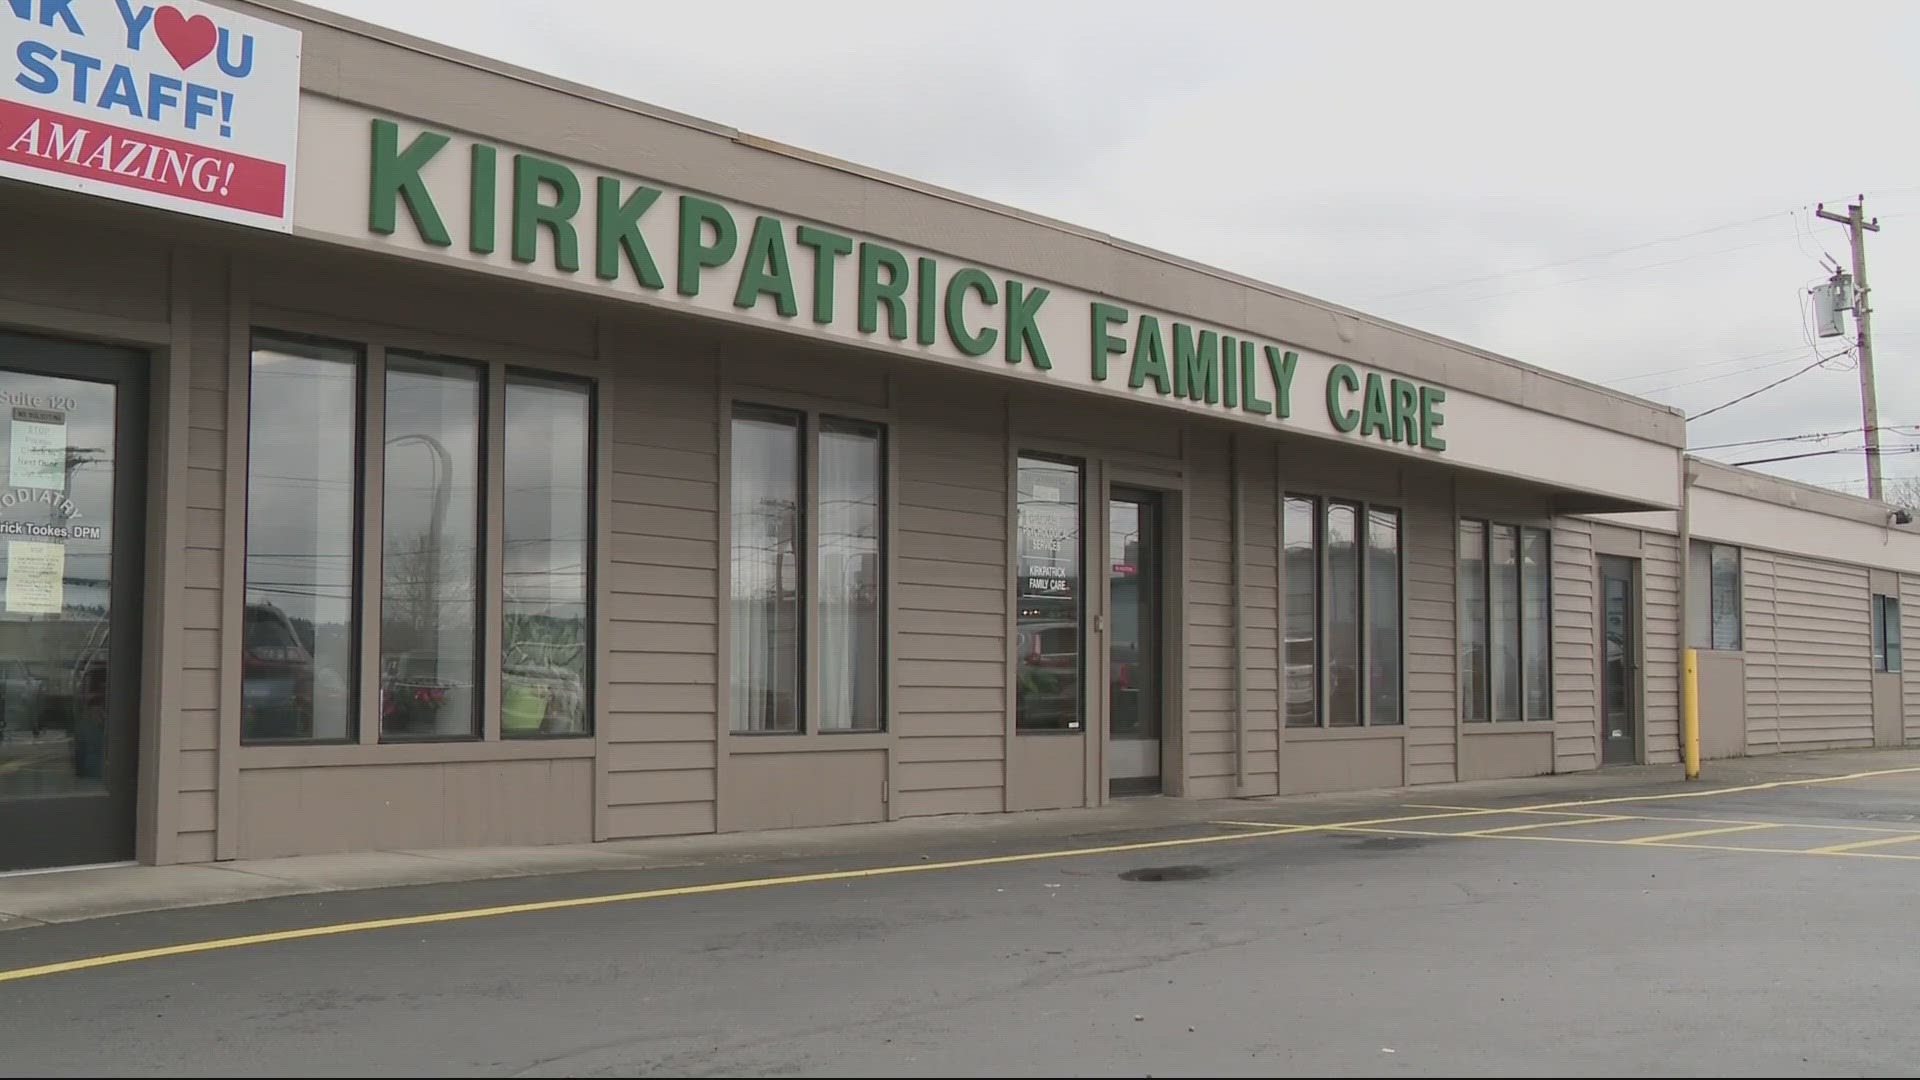 Dr. Richard Kirkpatrick said a drug distributor has instructed pharmacies not to honor opioid prescriptions from his office, leaving patients in pain.